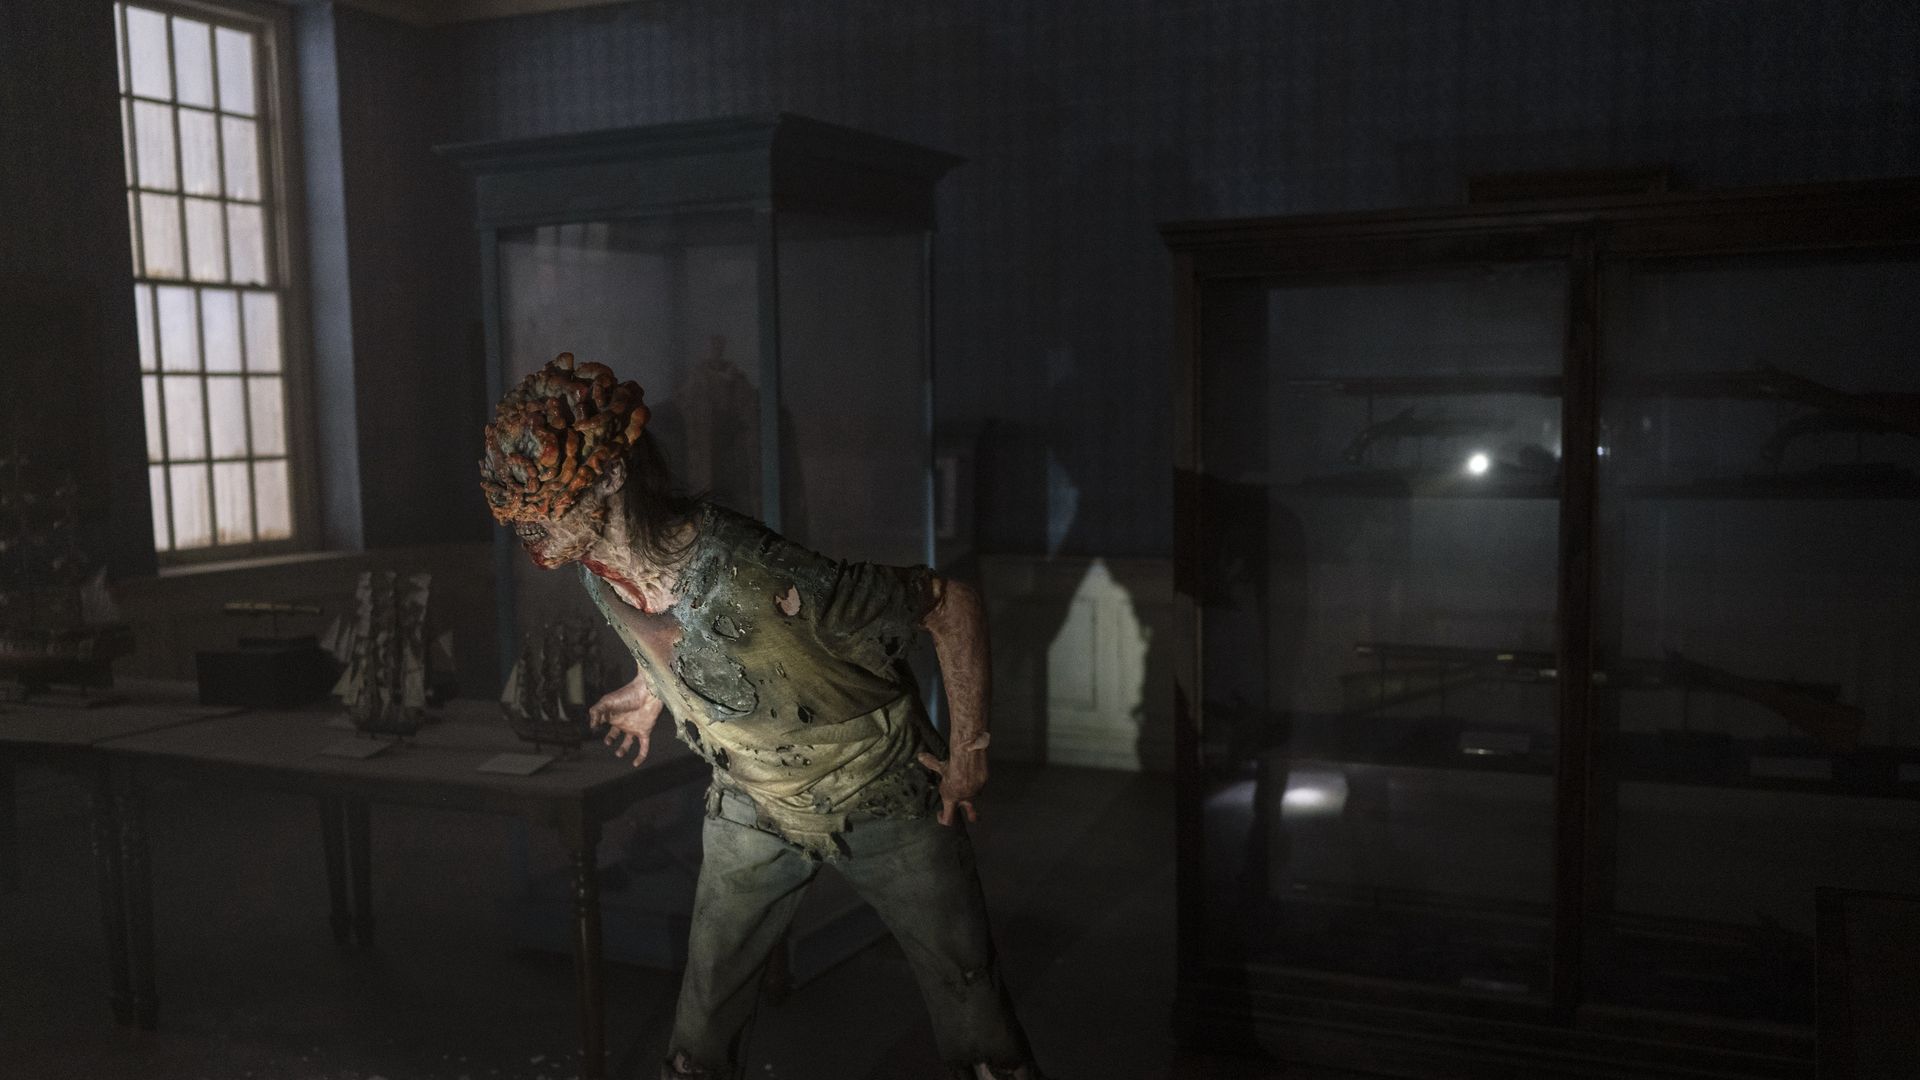 HBO's The Last of Us has revealed its first full trailer